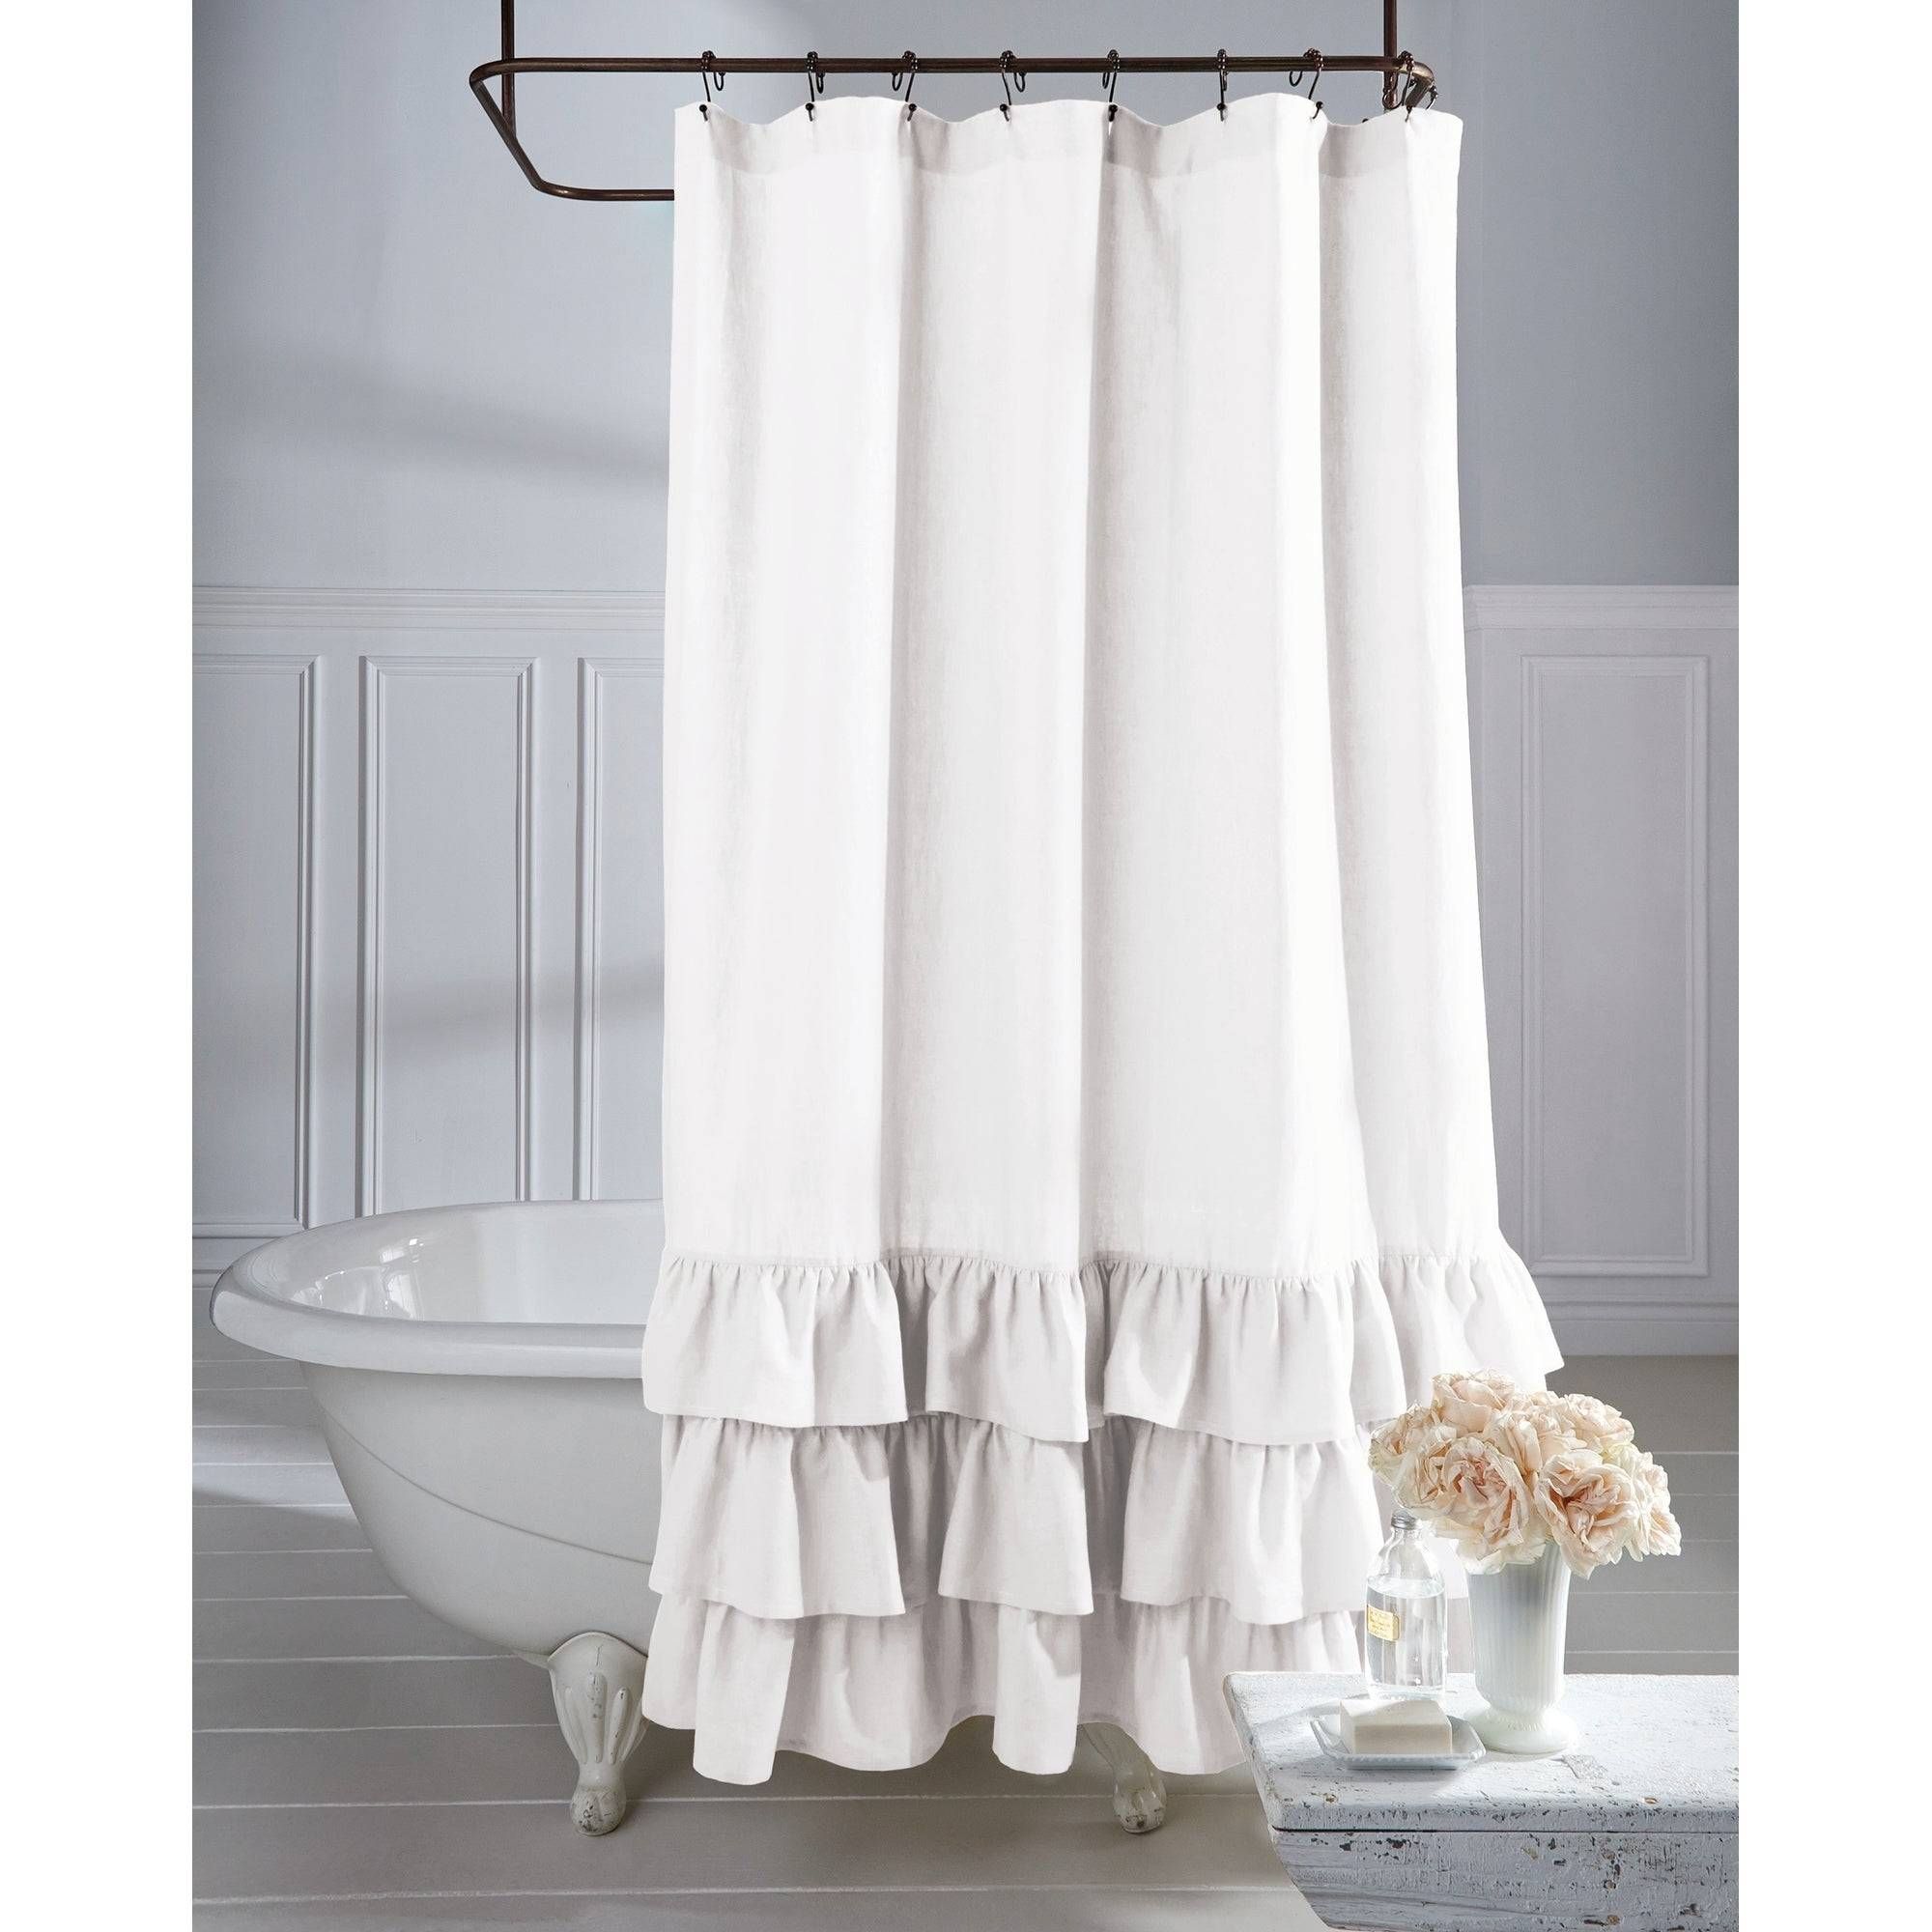 Fascinating Grey Ruffle Shower Curtain Farmhouse Linen Intended For Navy Vertical Ruffled Waterfall Valance And Curtain Tiers (Photo 10 of 20)